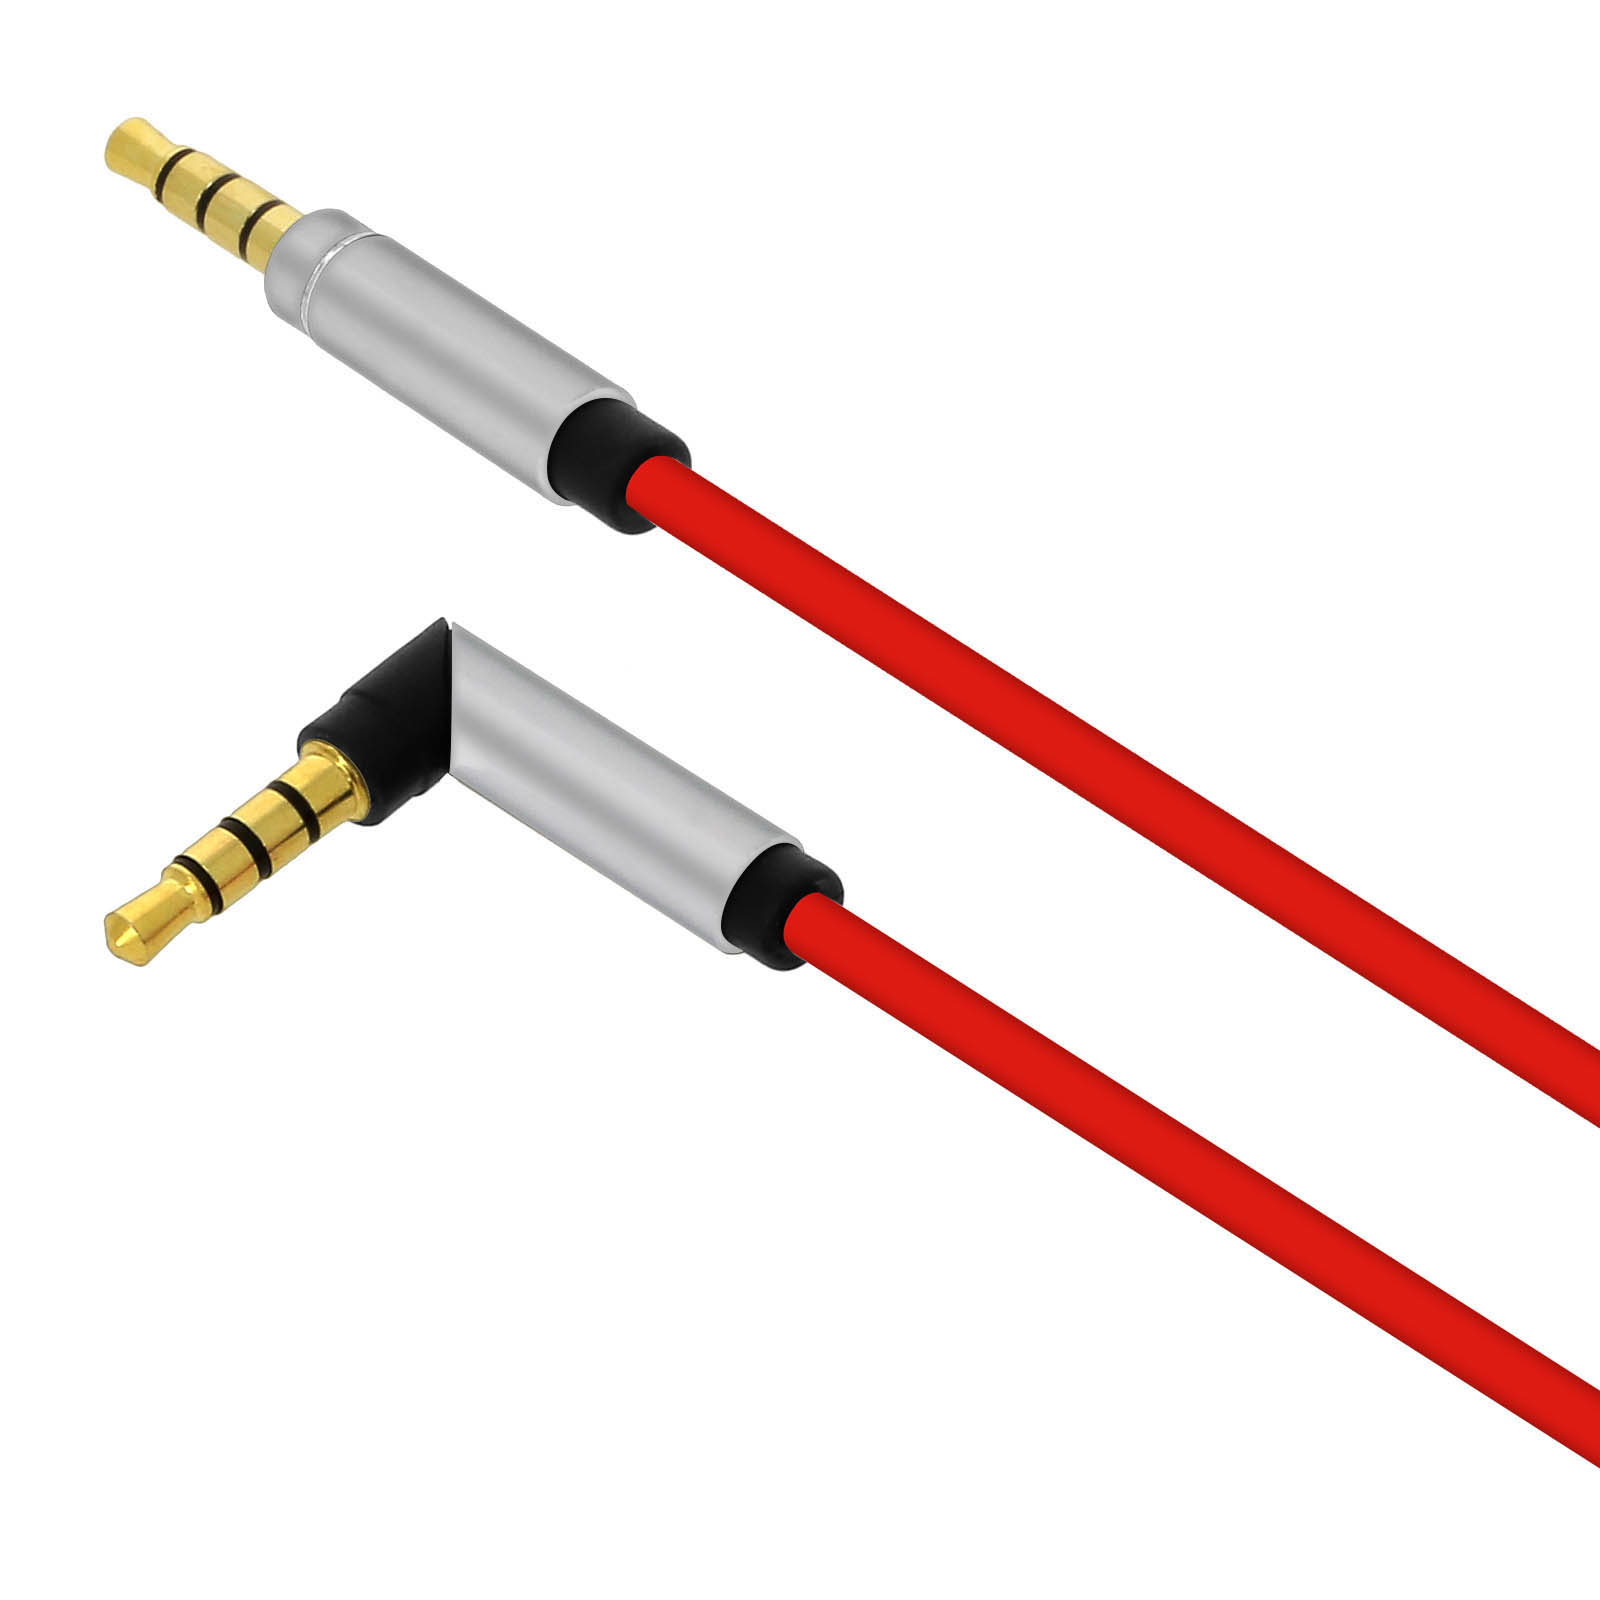 0.5ft (0.15m) Value Series™ One 3.5mm Stereo Male To Two RCA Stereo Male Y- Cable, Audio Cables, AV Cables